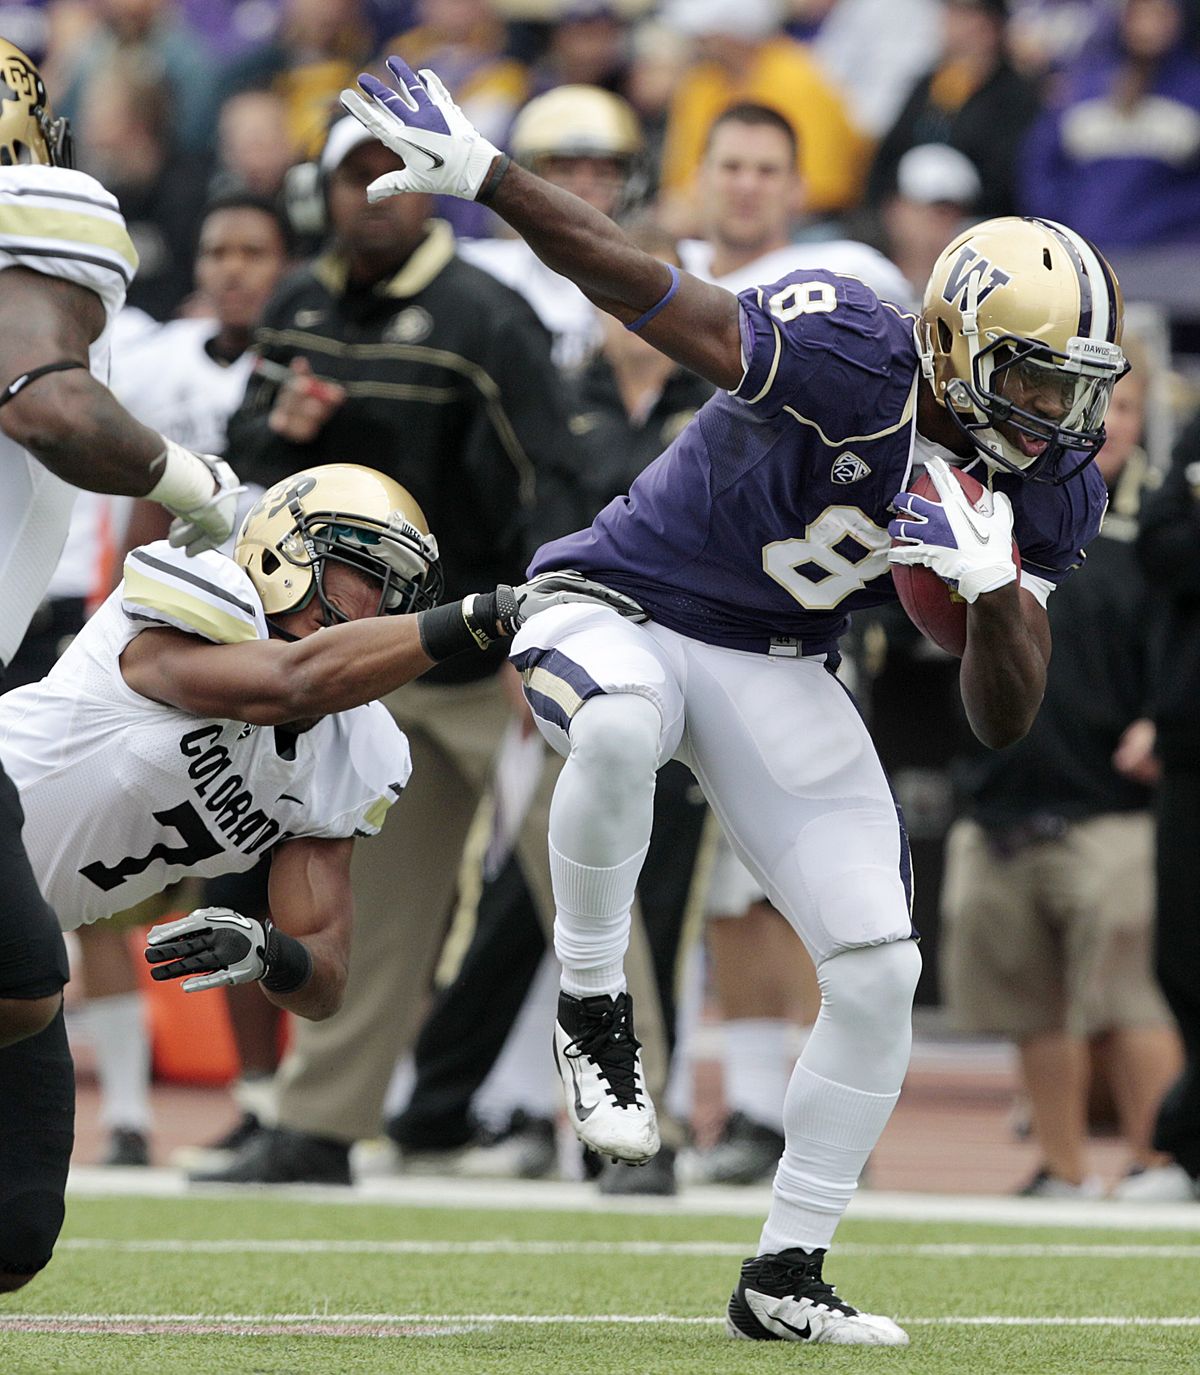 Wide receiver Kevin Smith is one of a stable of offensive weapons the Washington Huskies can go to. (Associated Press)